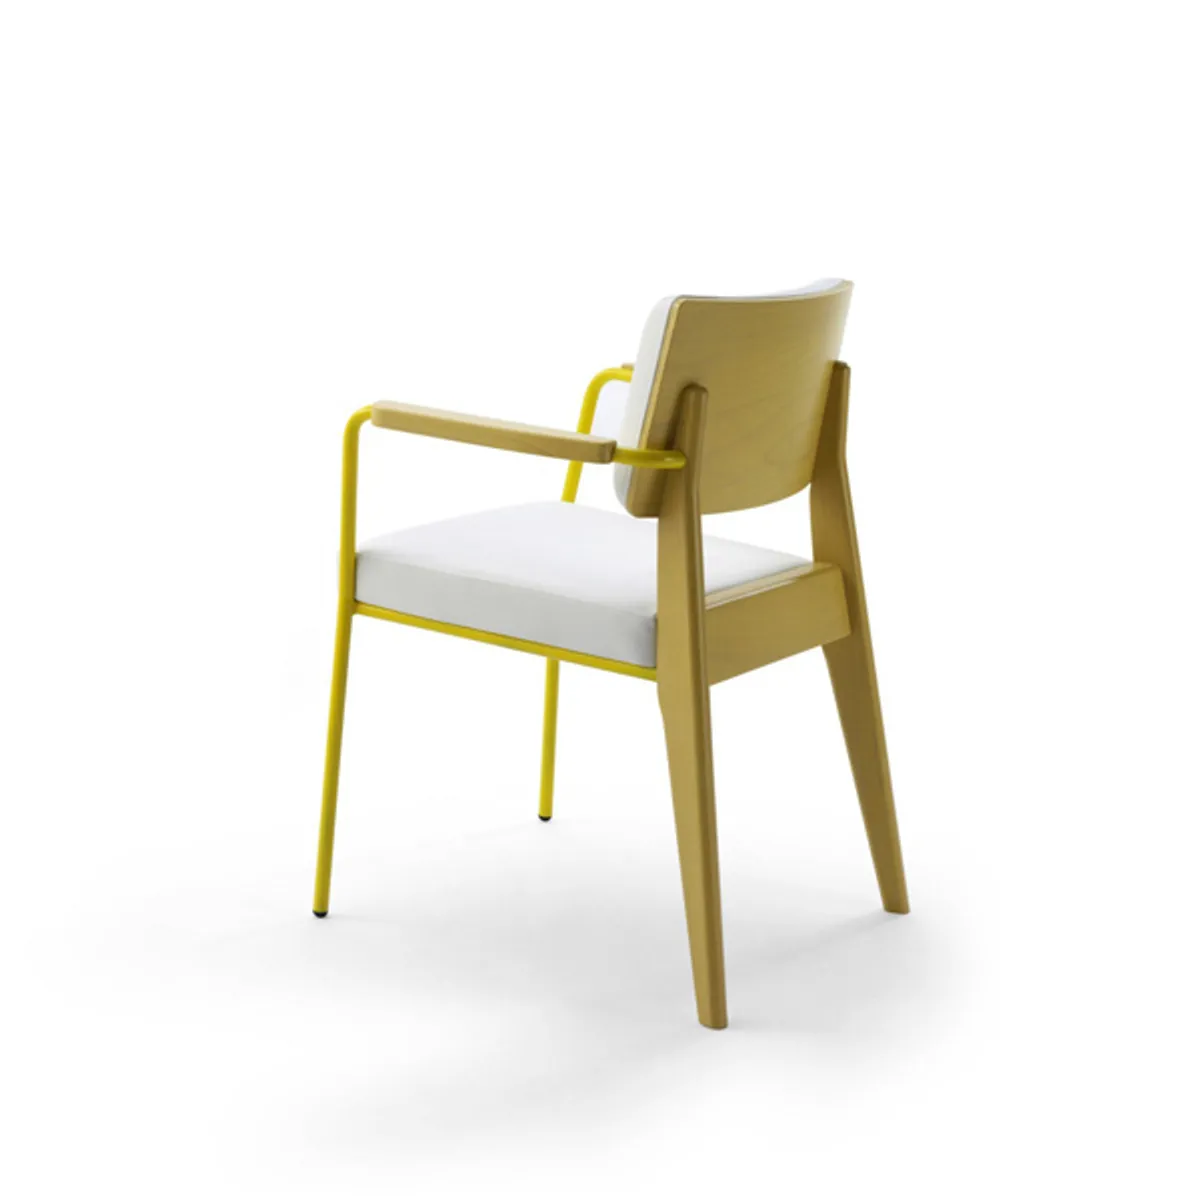 Bay Armchair Mustard Metal Frame Inside Out Contracts